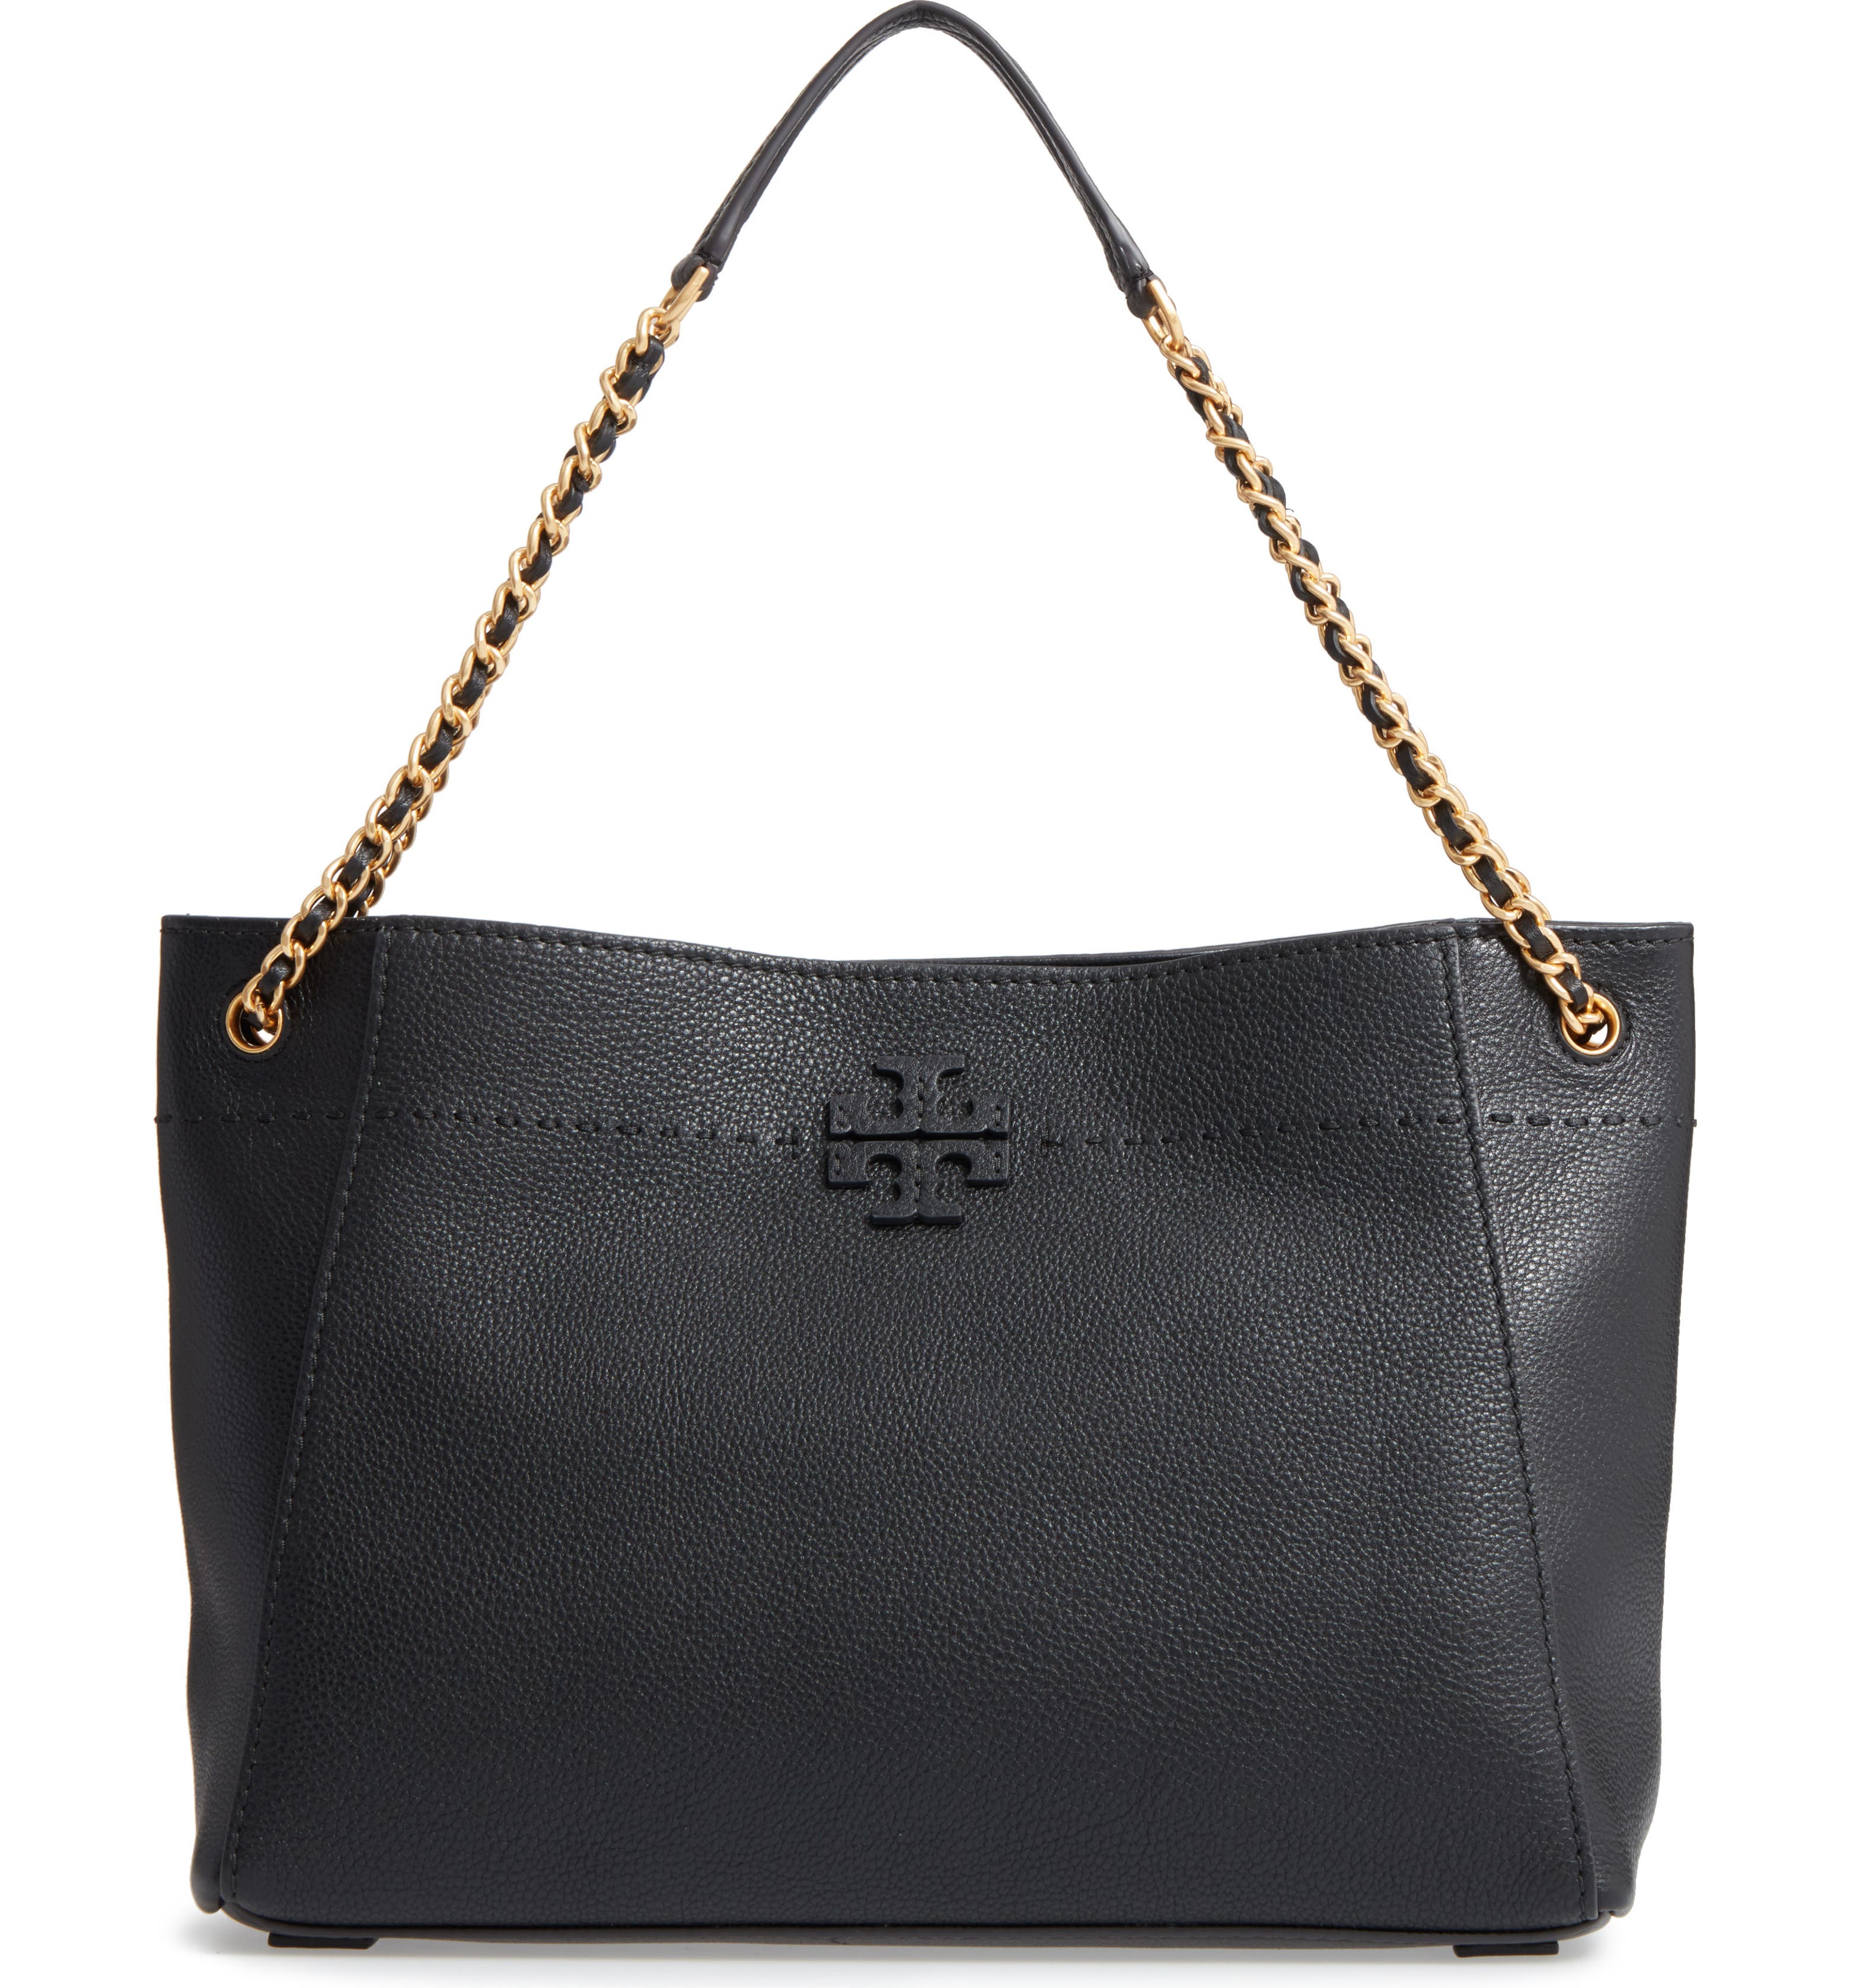 Tory Burch McGraw Slouchy Leather Shoulder Bag | Nordstrom